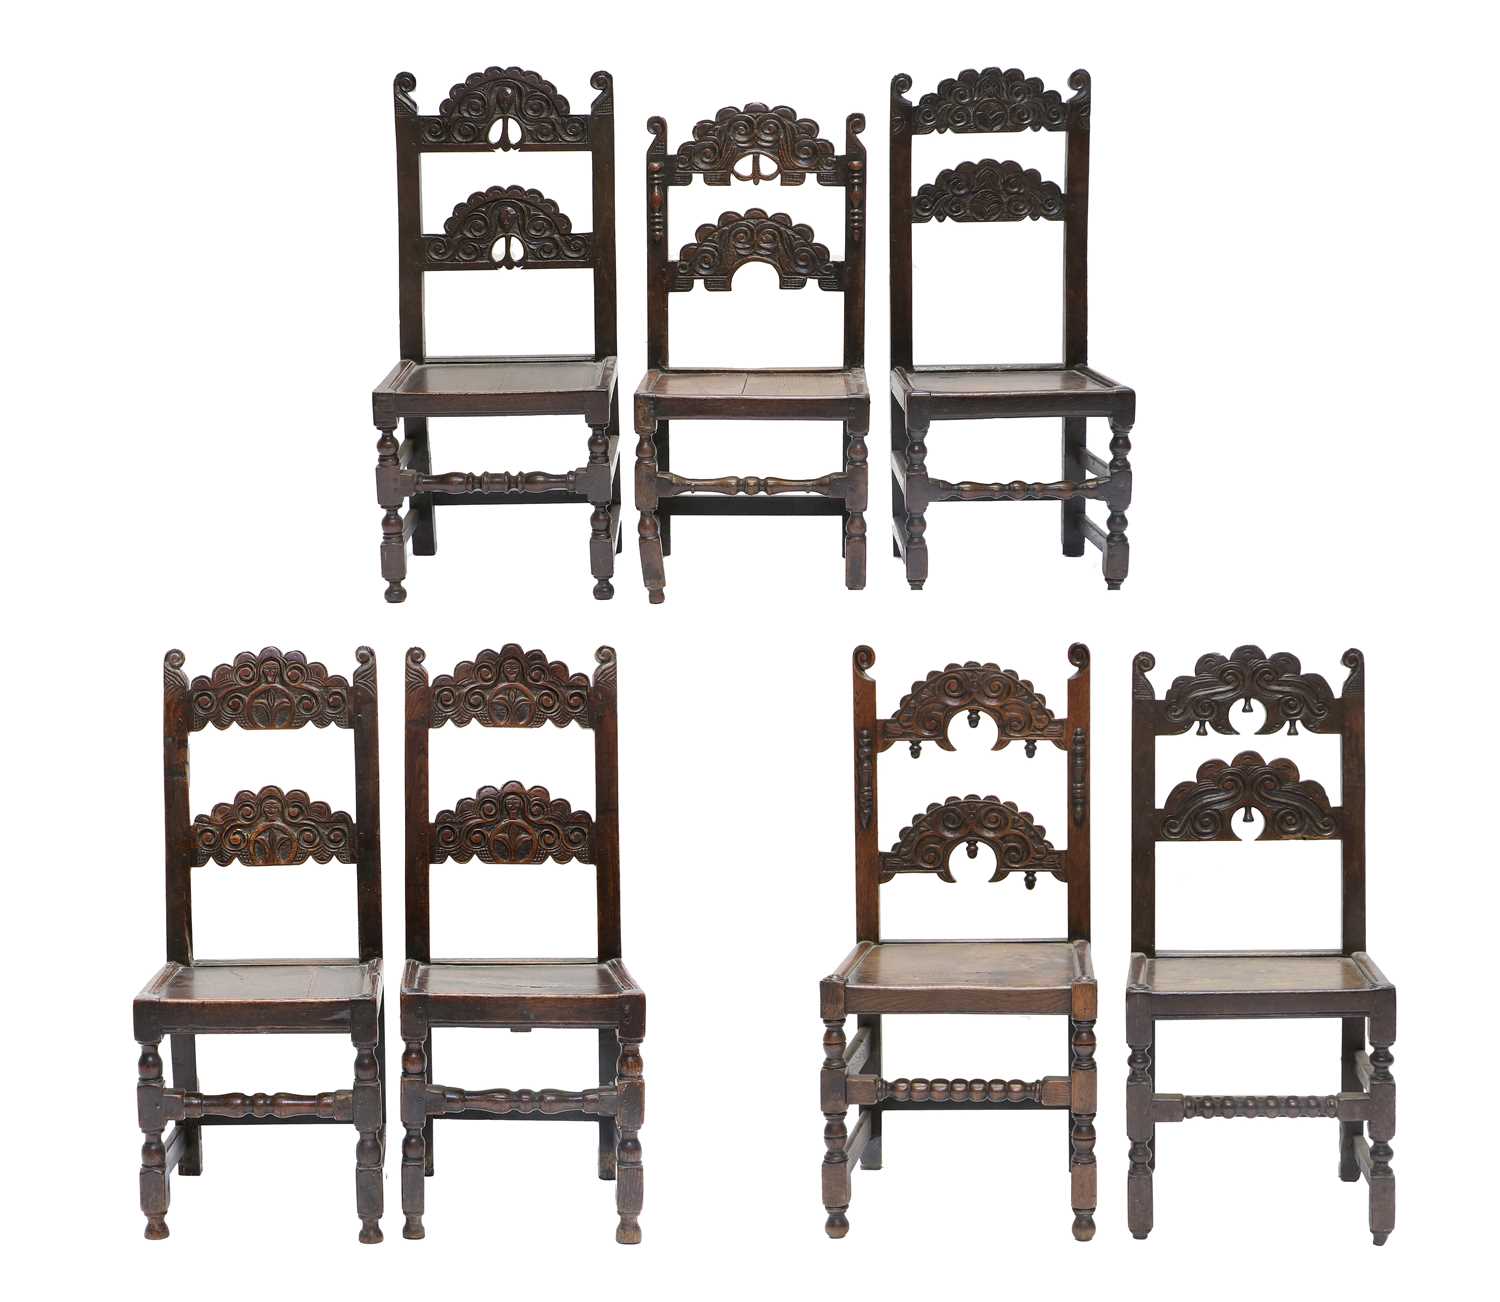 A Harlequin Set of Seven Late 17th Century Joined Oak Yorkshire Back Stools, comprising: a pair with